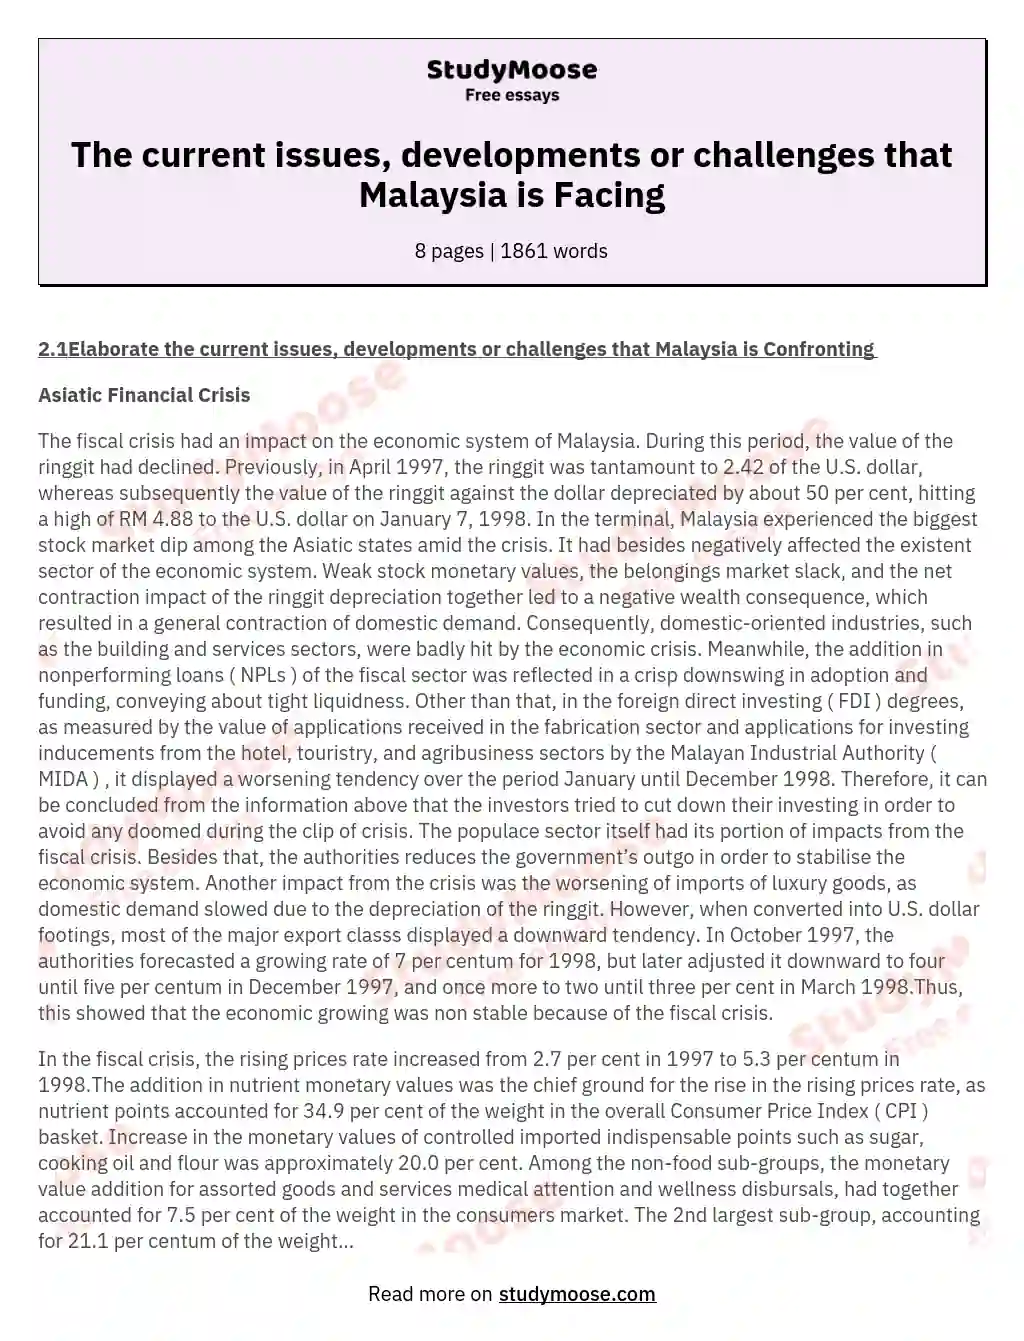 The current issues, developments or challenges that Malaysia is Facing